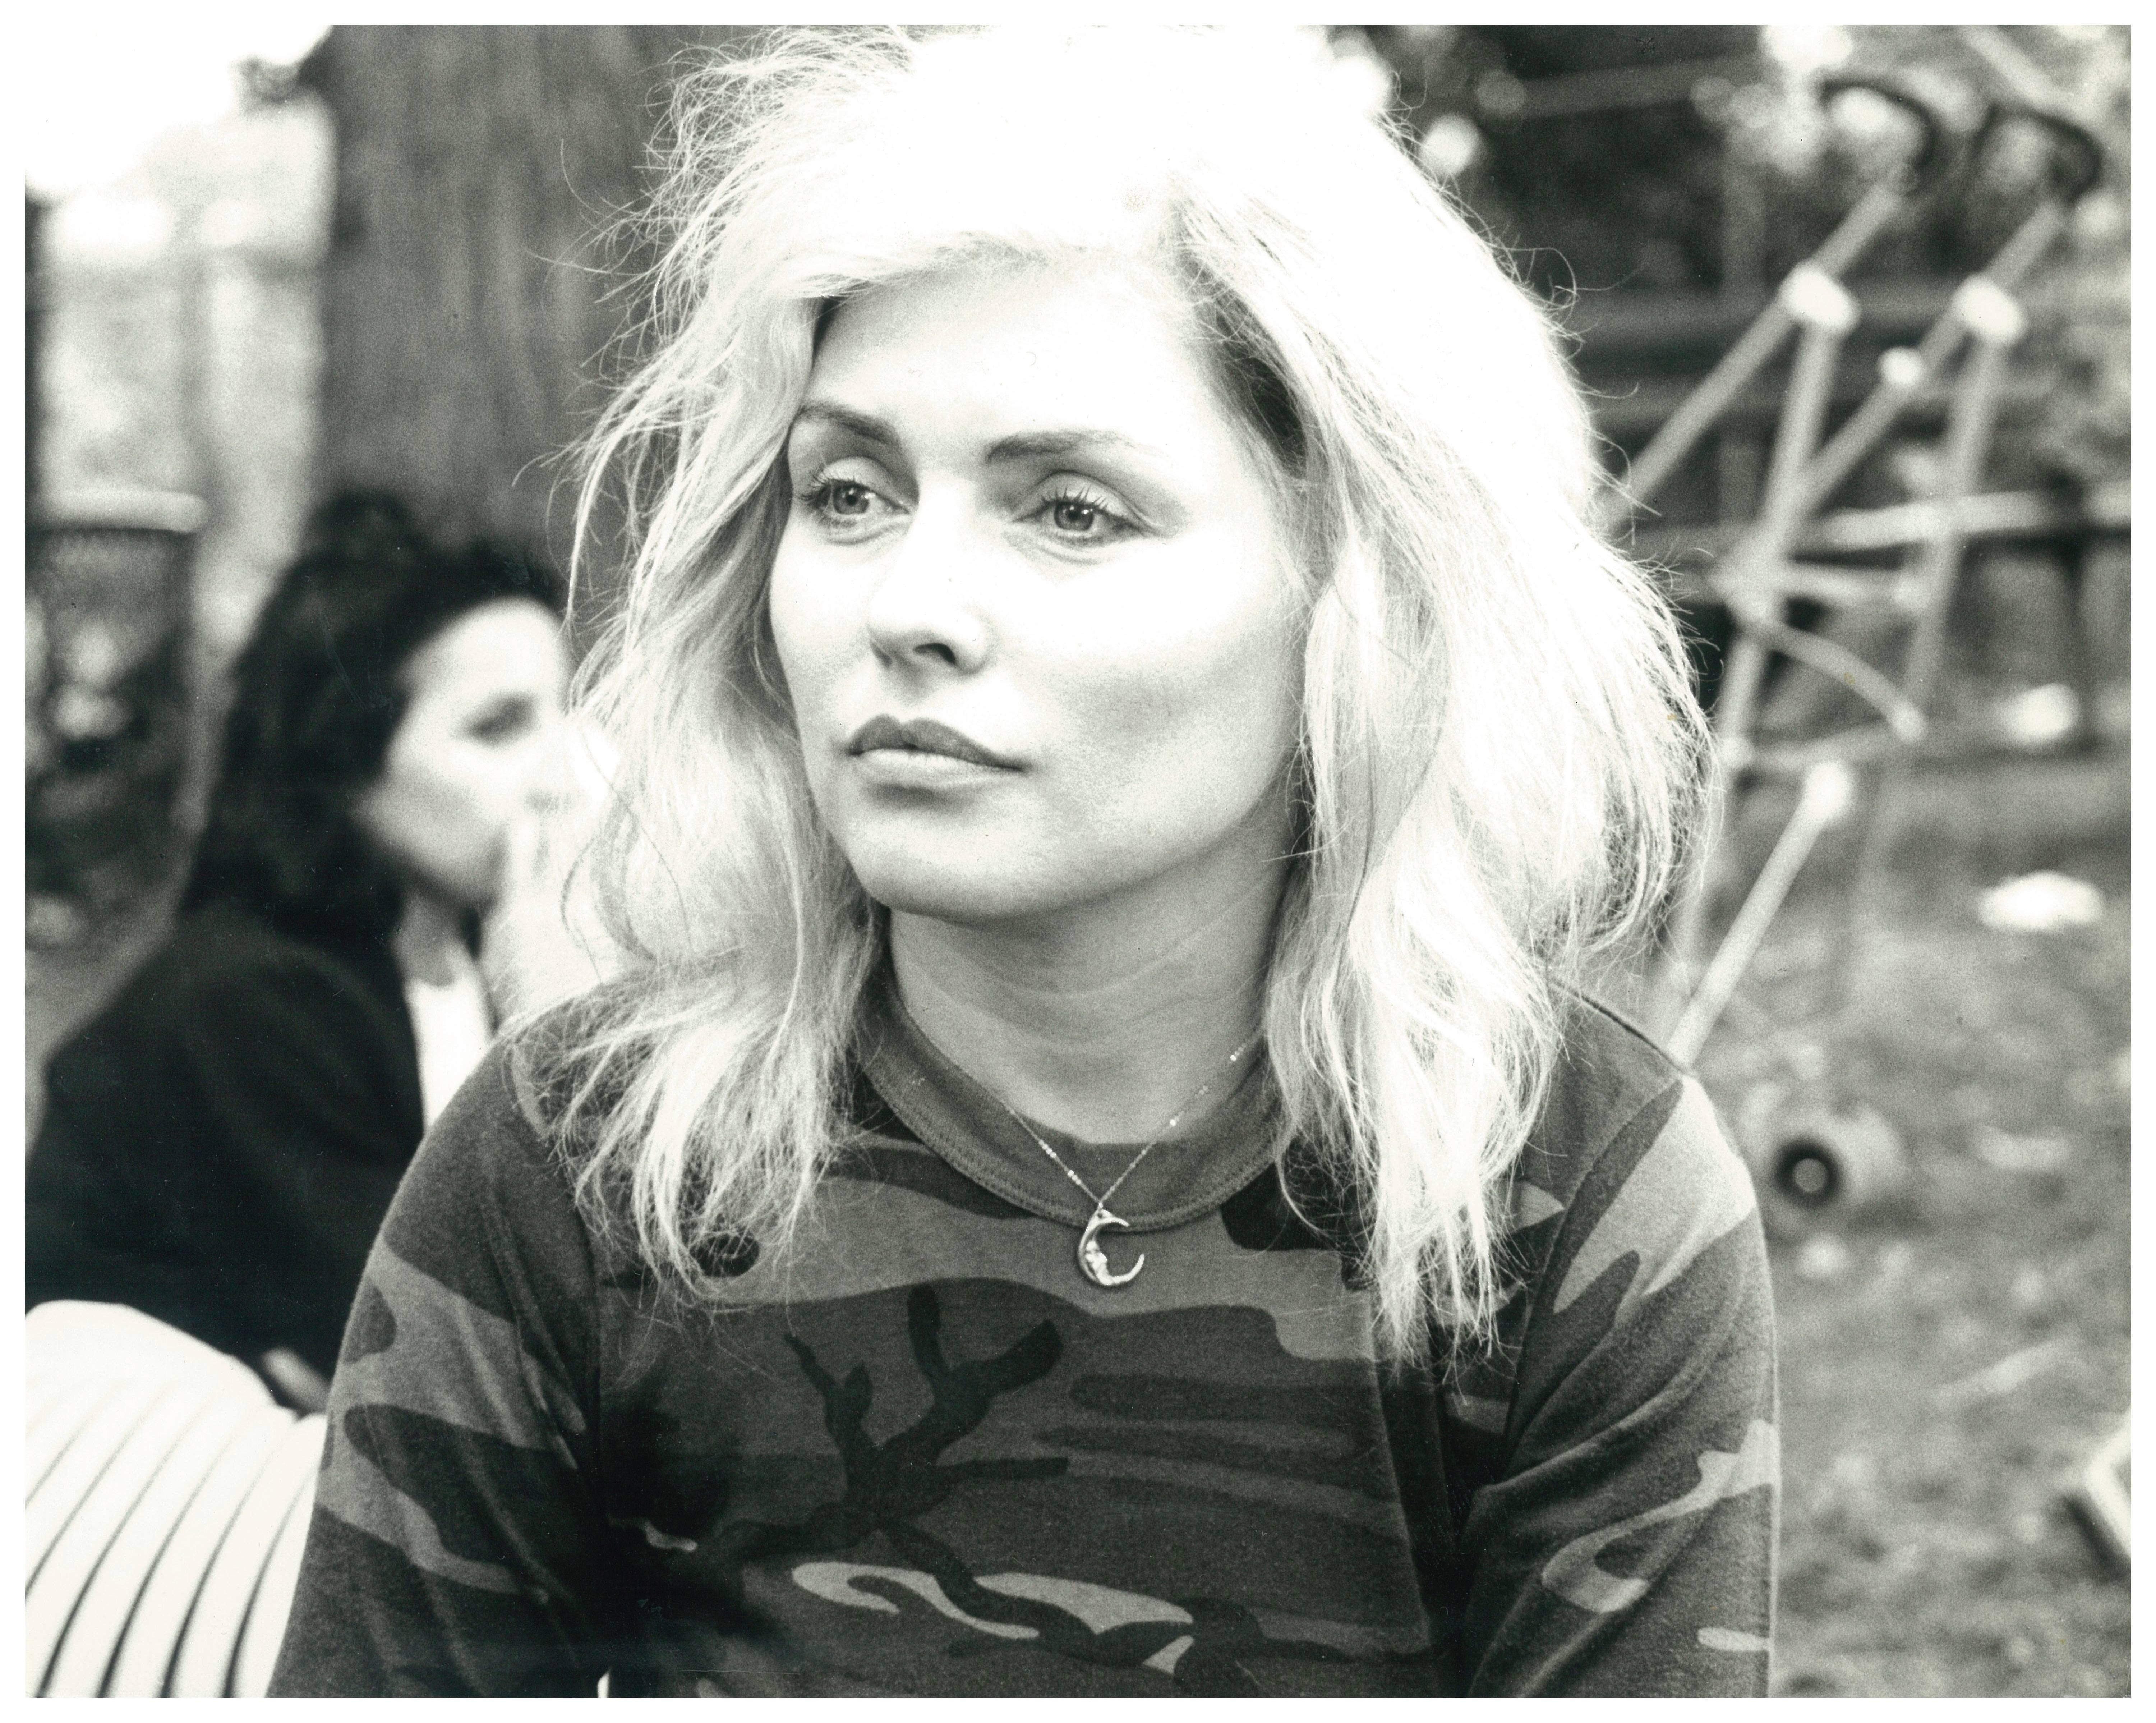 Andy Warhol Portrait Photograph - Debbie Harry in Tompkins Square Park wearing Stephen Sprouse Camo 